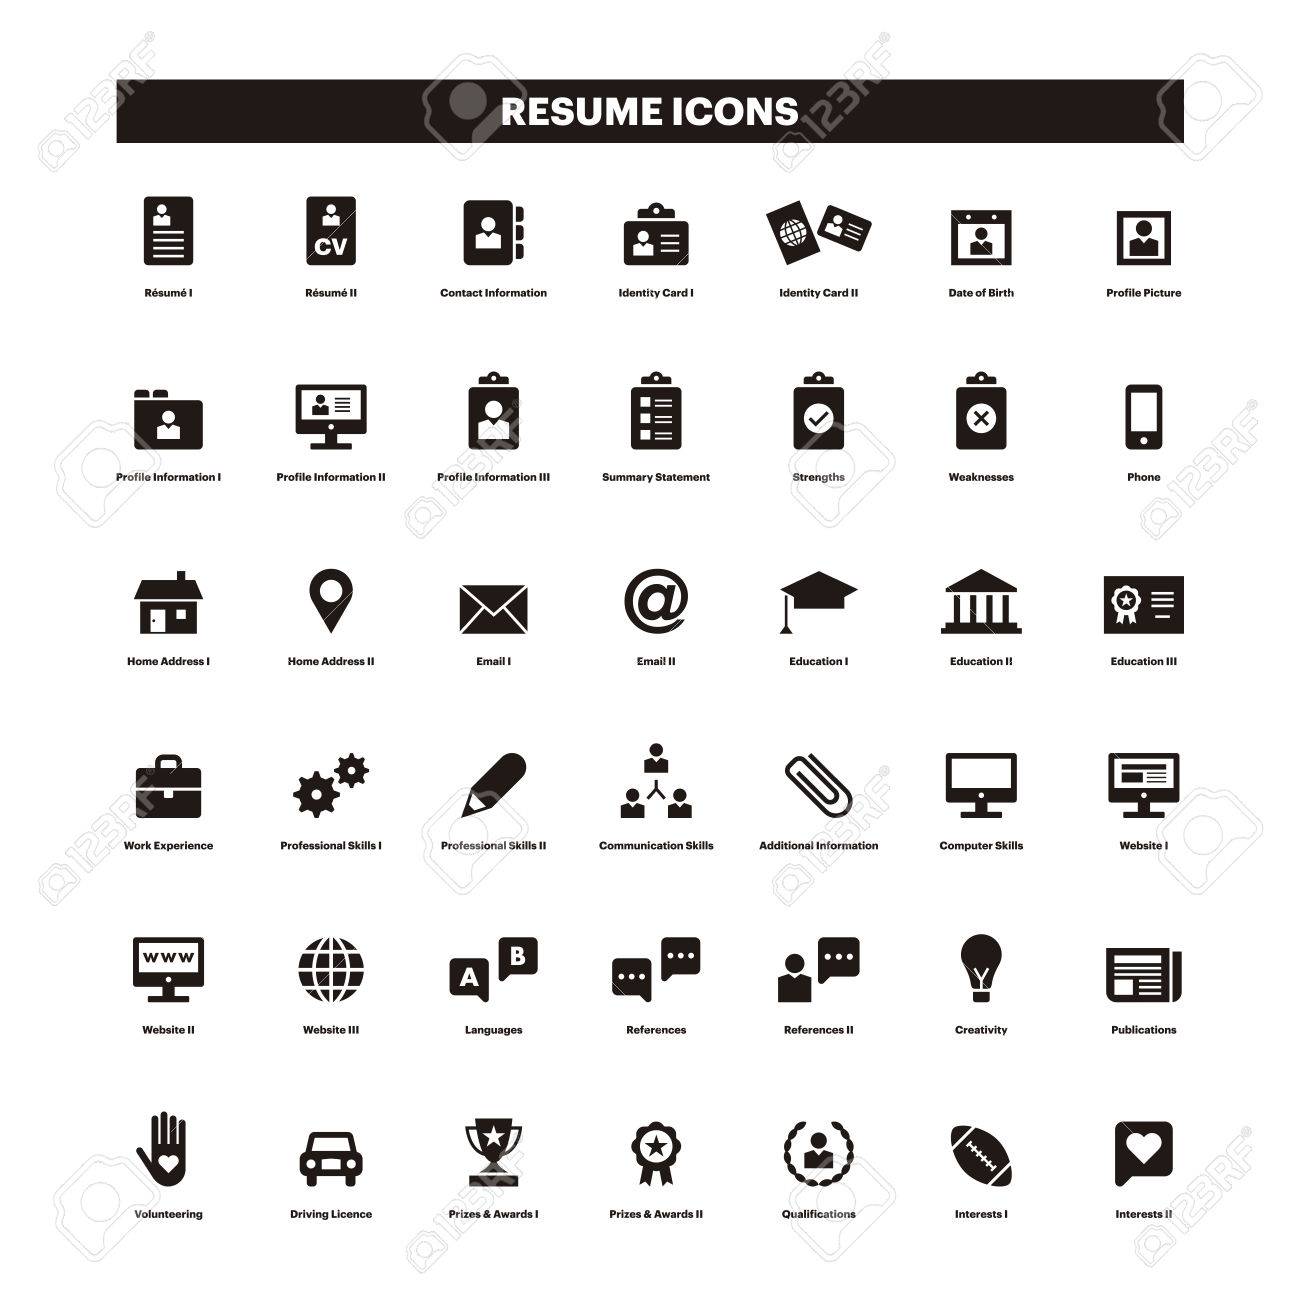 Resume Icon Vector #49639 - Free Icons Library